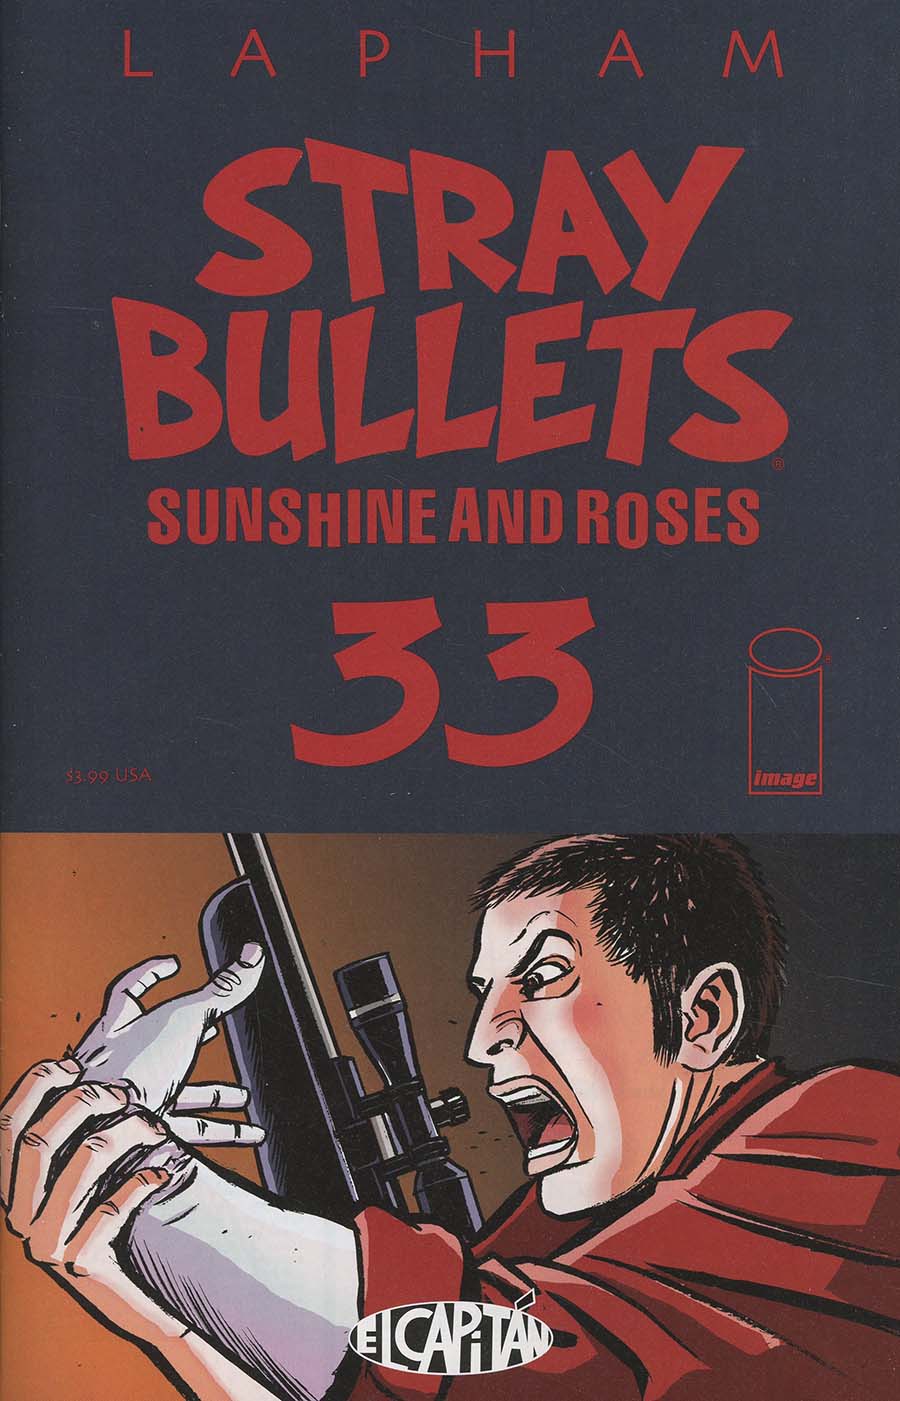 Stray Bullets Sunshine And Roses #33